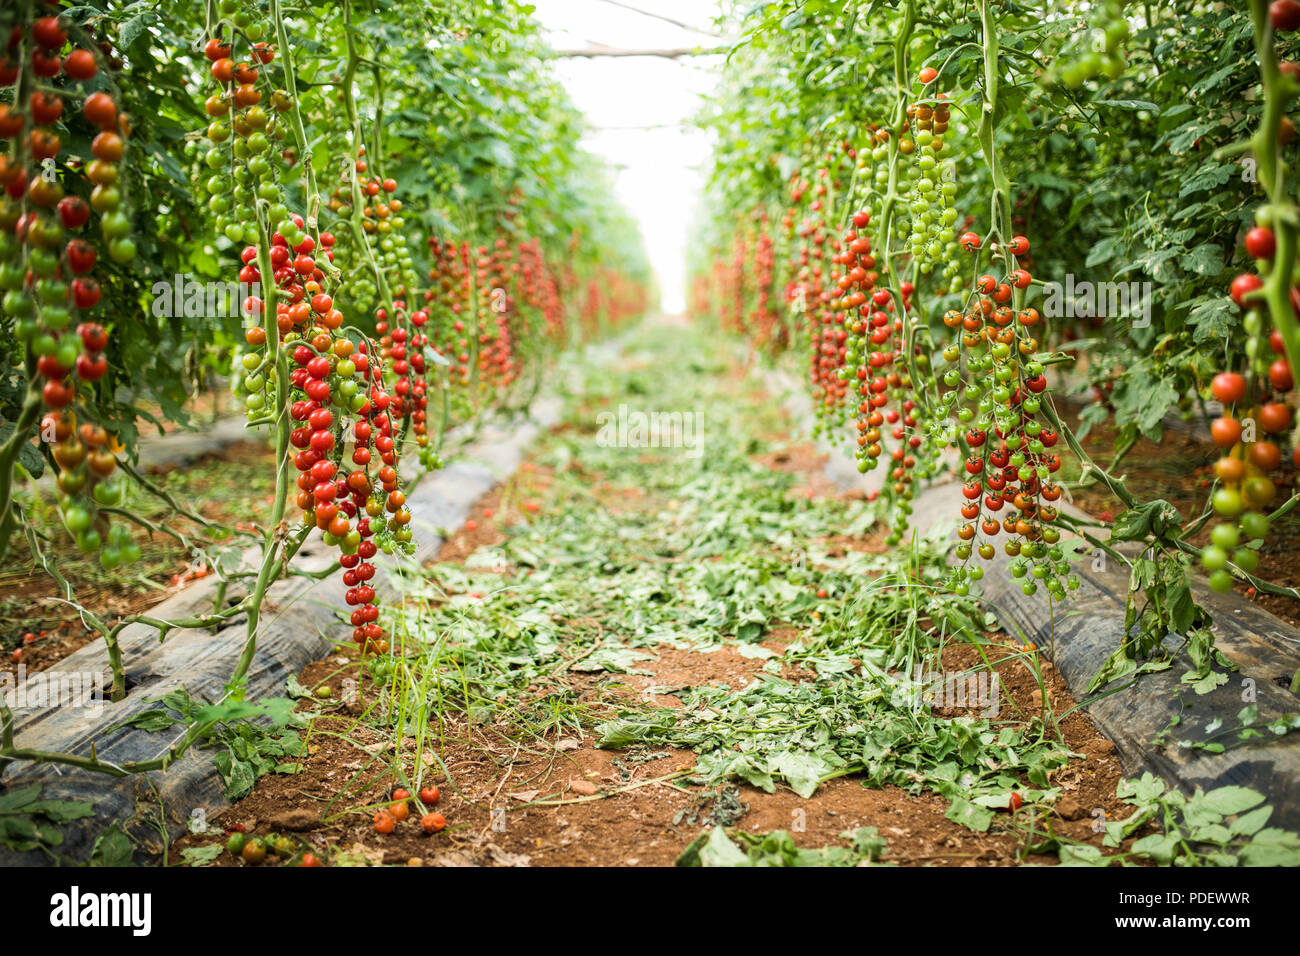 Red Cherry Tomato Growing Cherry Tomatoes In The Pots In The